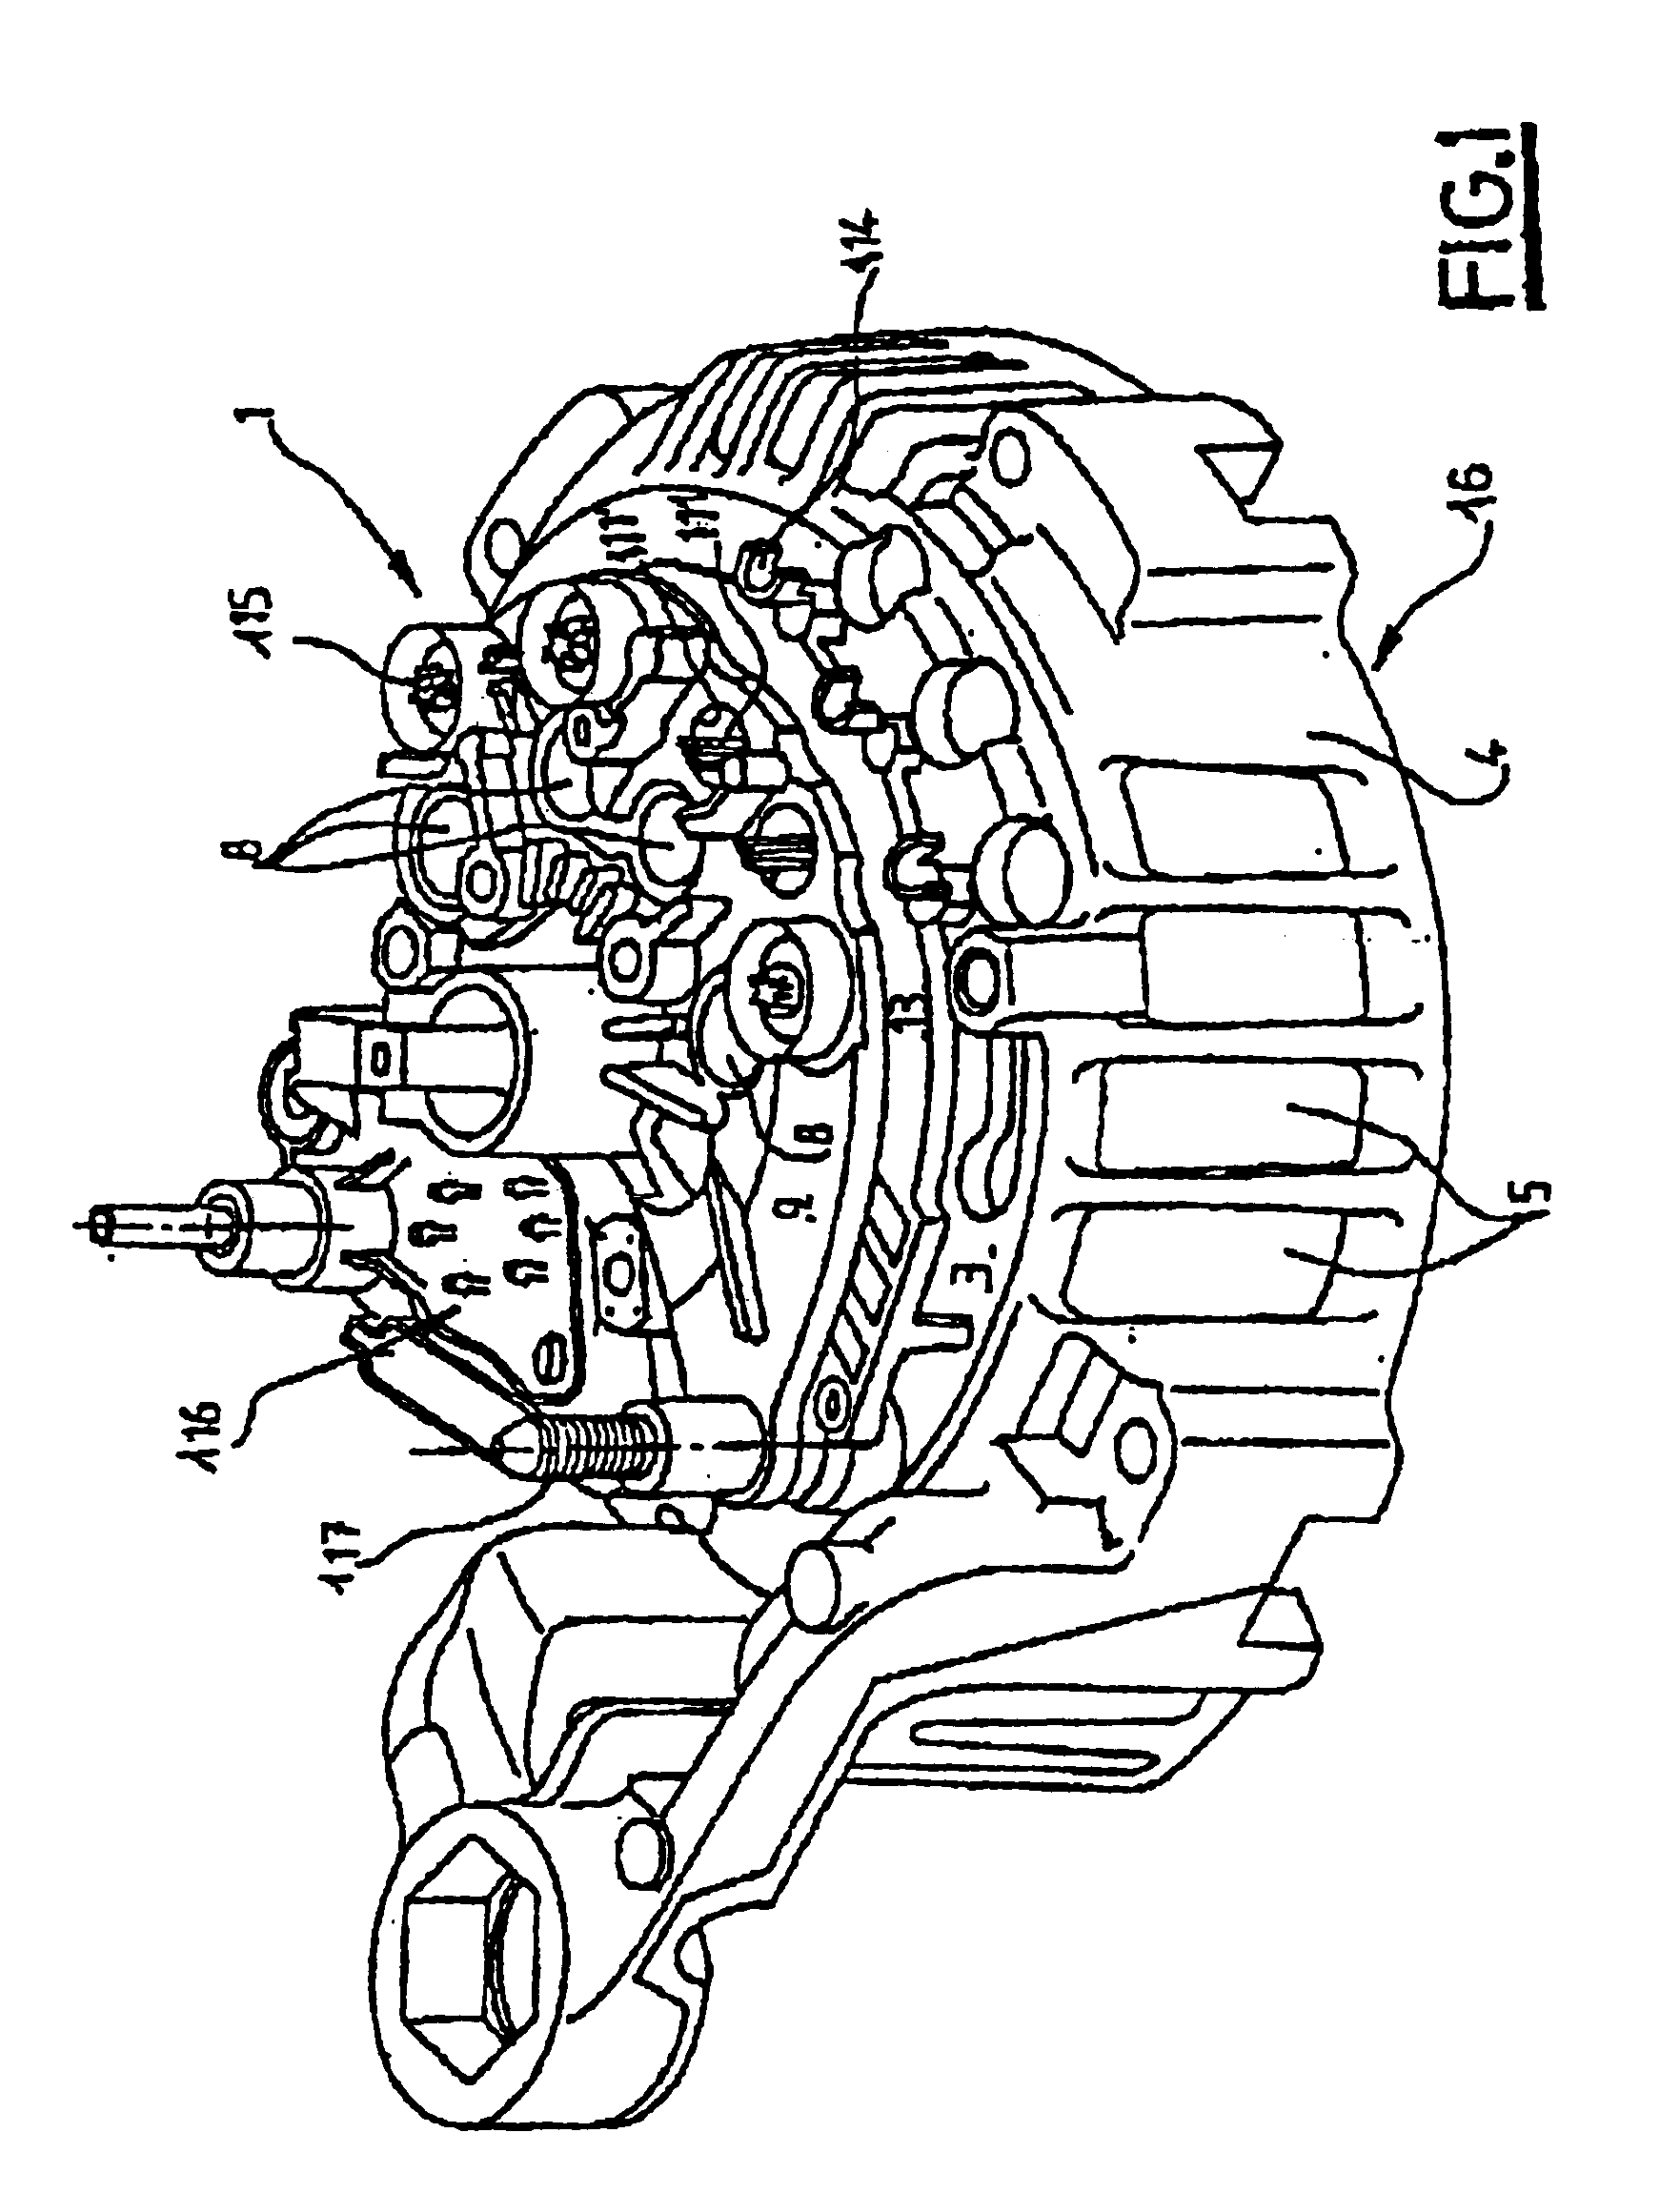 Rotating electrical machine, in particular alternator for motor vehicle